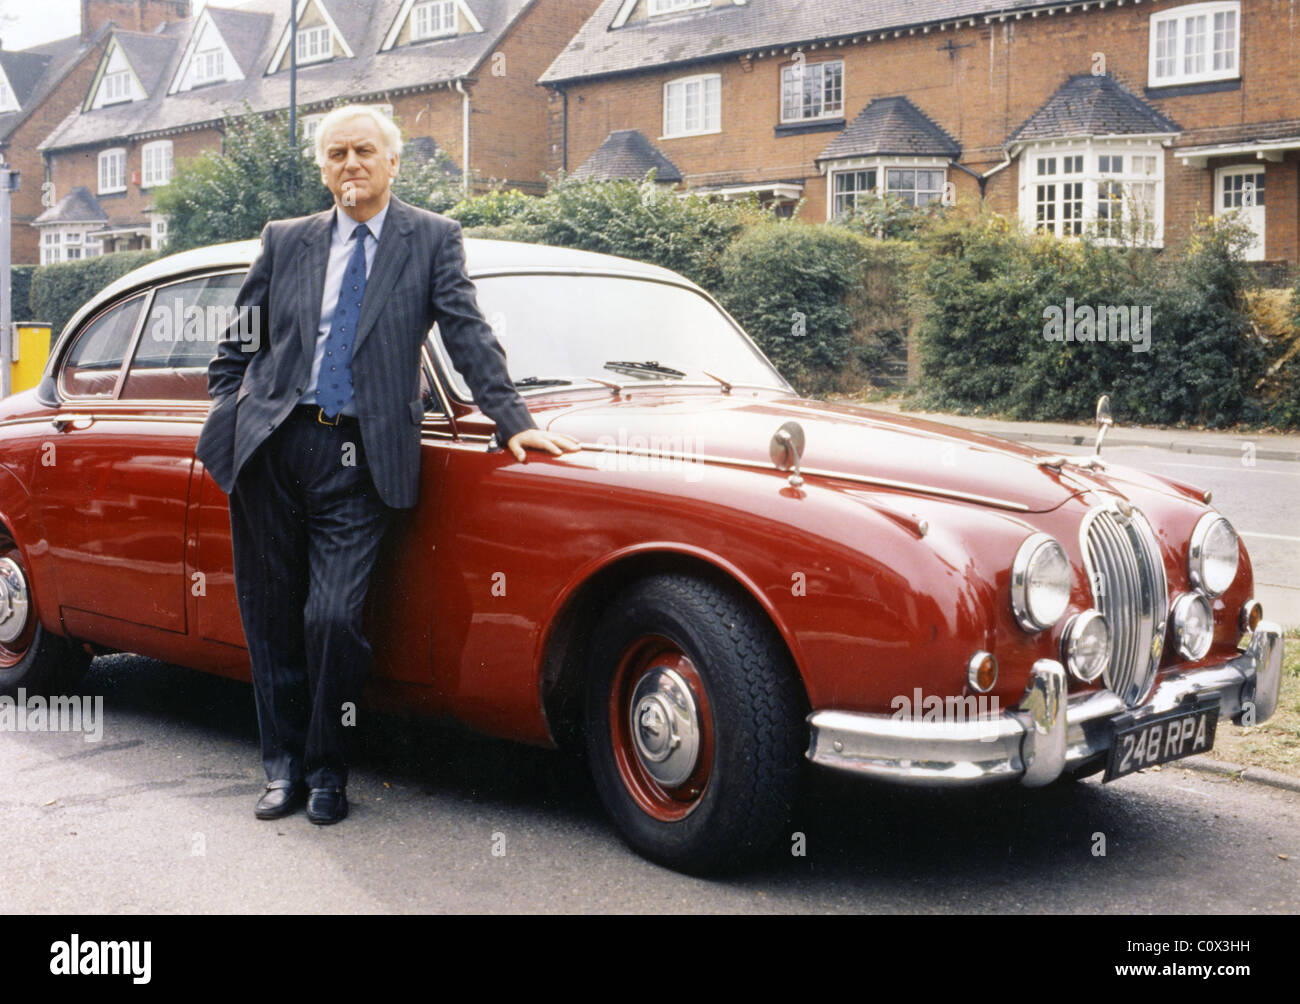 INSPECTOR MORSE  UK TV police series drama produced by Zenith for CIT and Carlton with John Thaw here with his Jaguar MK2 saloon Stock Photo